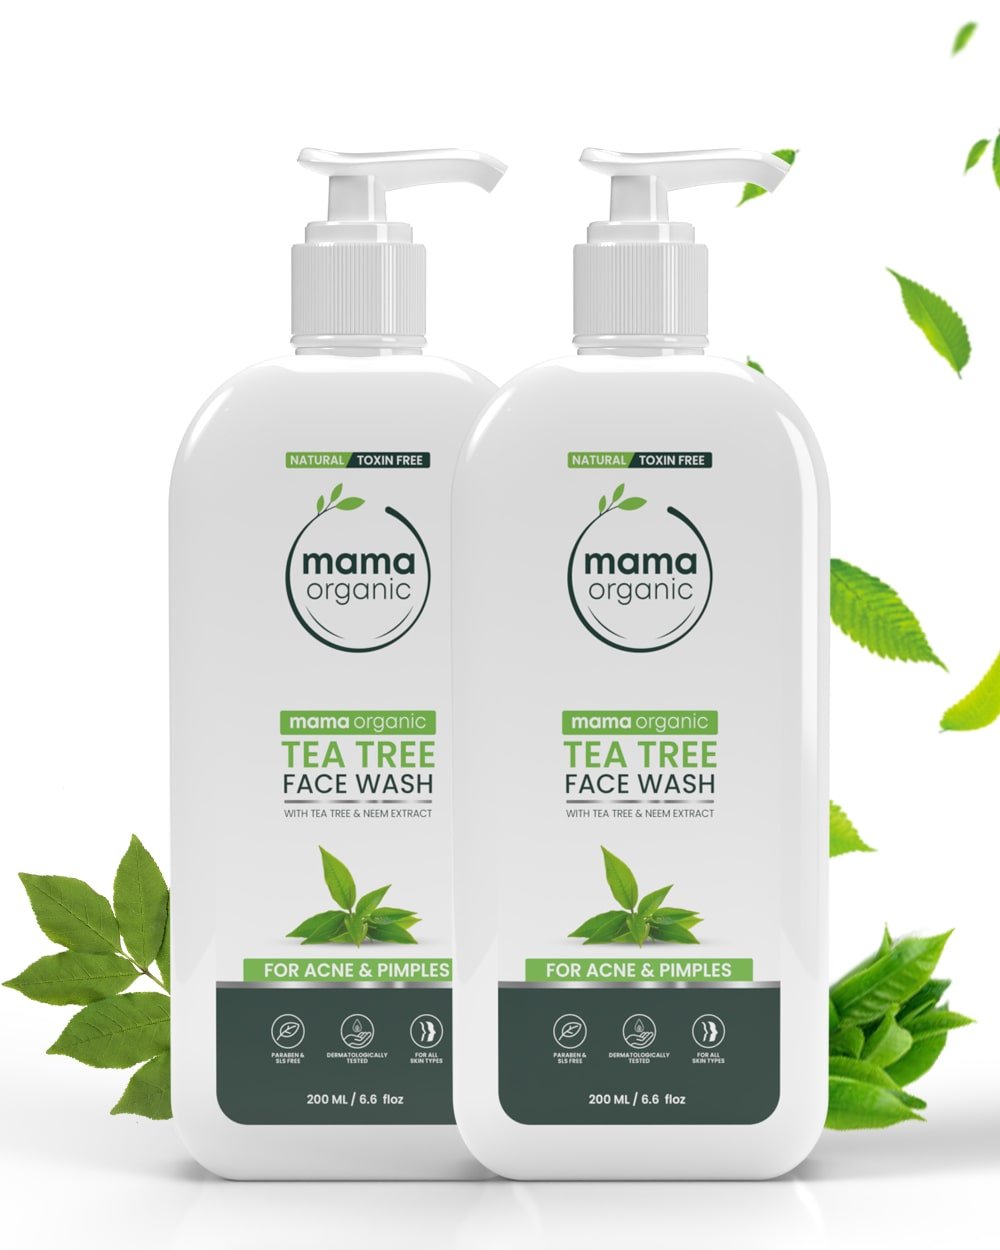 Tea Tree Face Wash 200g Combo for Acne & Pimples - Natural & Toxin-Free - MamaOrganic